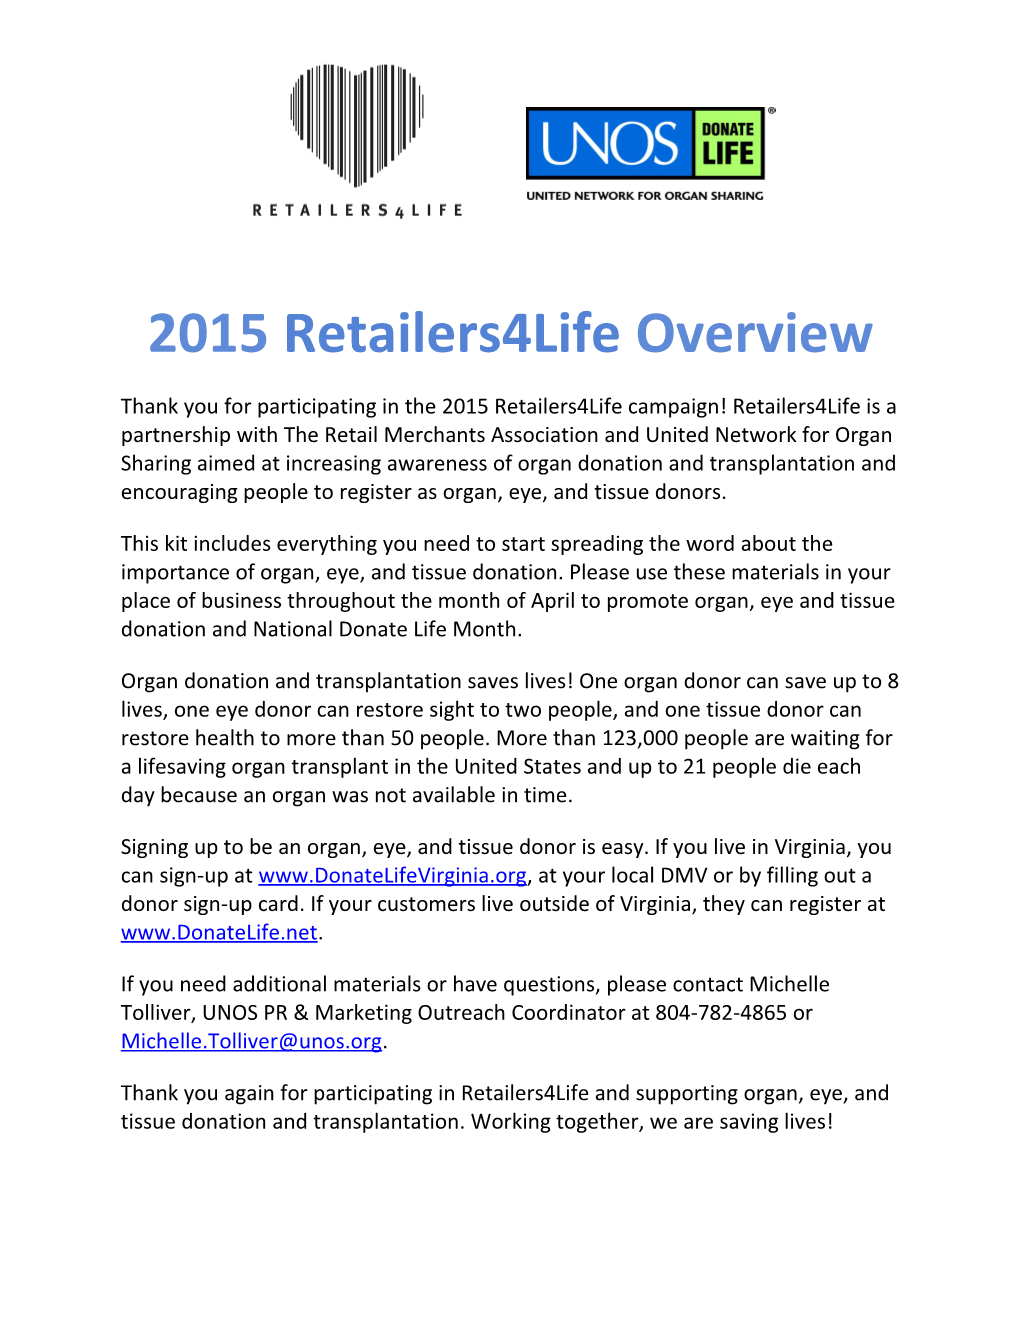 Thank You for Participating in the 2015 Retailers4life Campaign! Retailers4life Is a Partnership